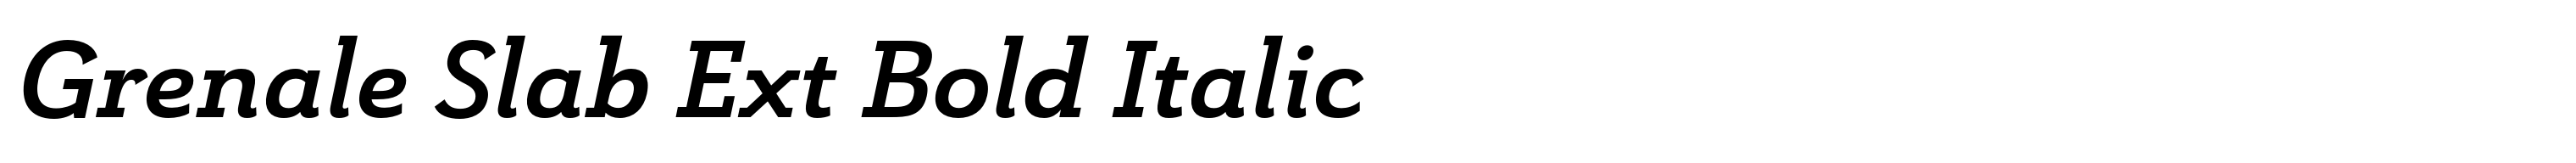 Grenale Slab Ext Bold Italic